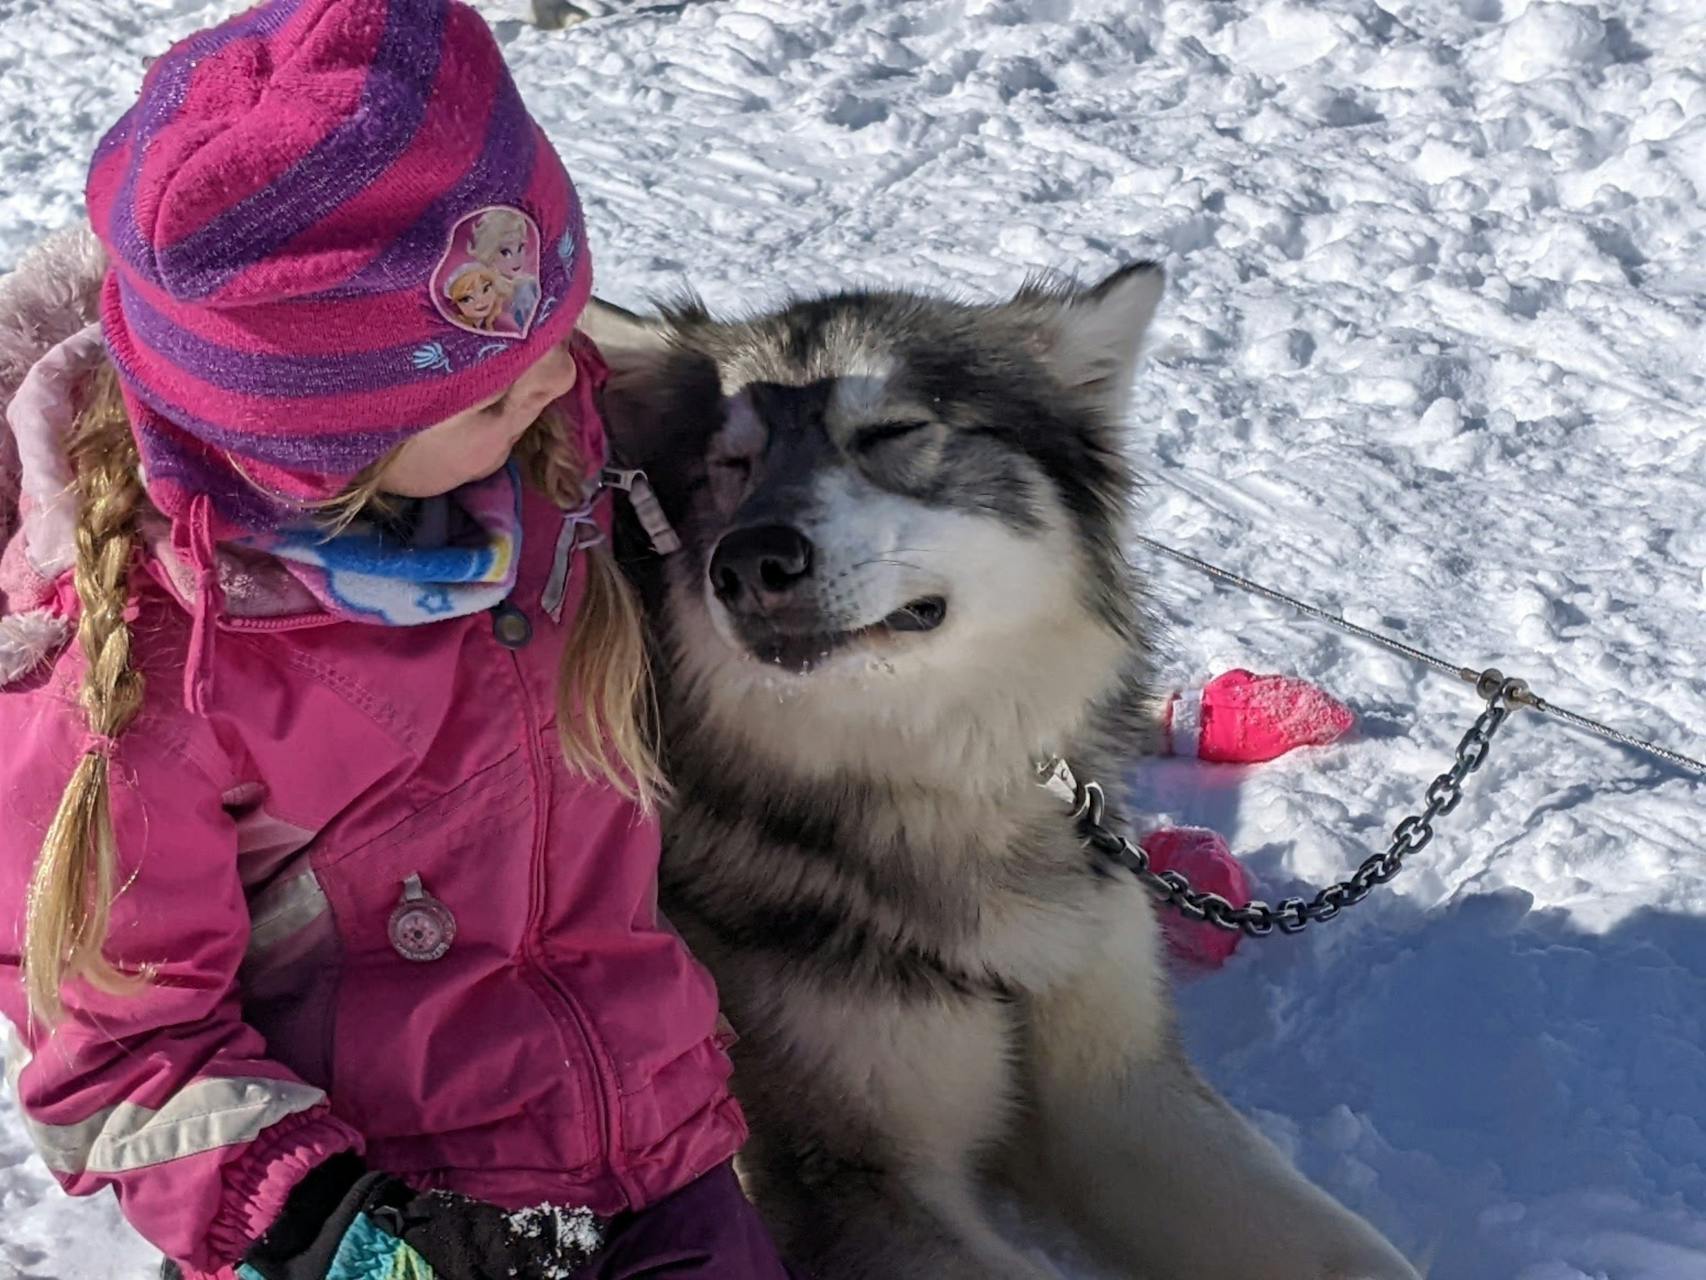 At Points Unknown, dog sledding experiences end with a little cuddle time.